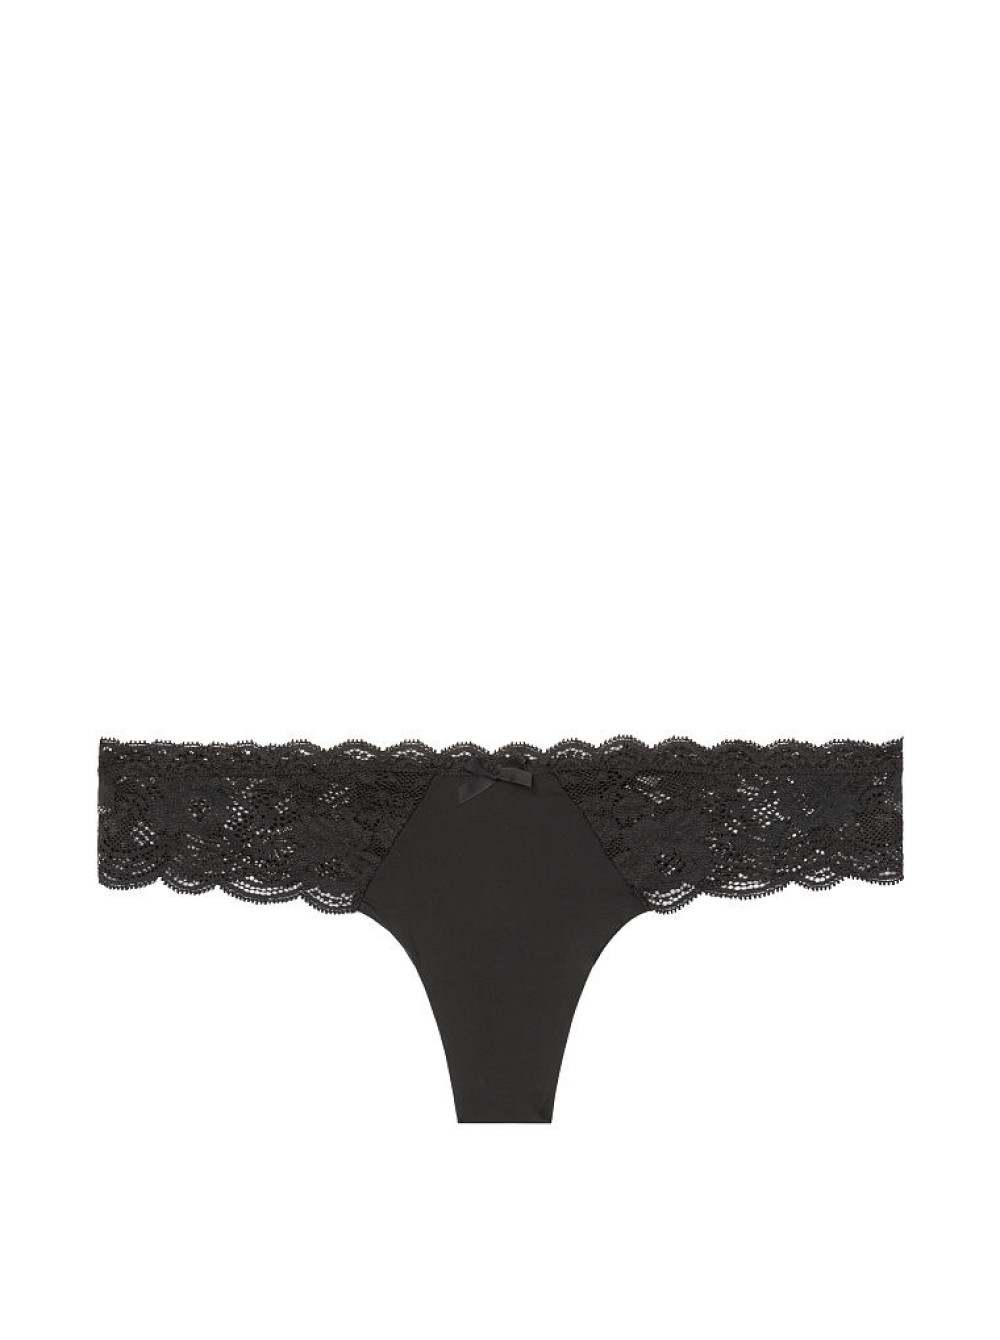 ❤️VICTORIAS SECRET Dream Angels Very Sexy Lacy Thong Panty Black